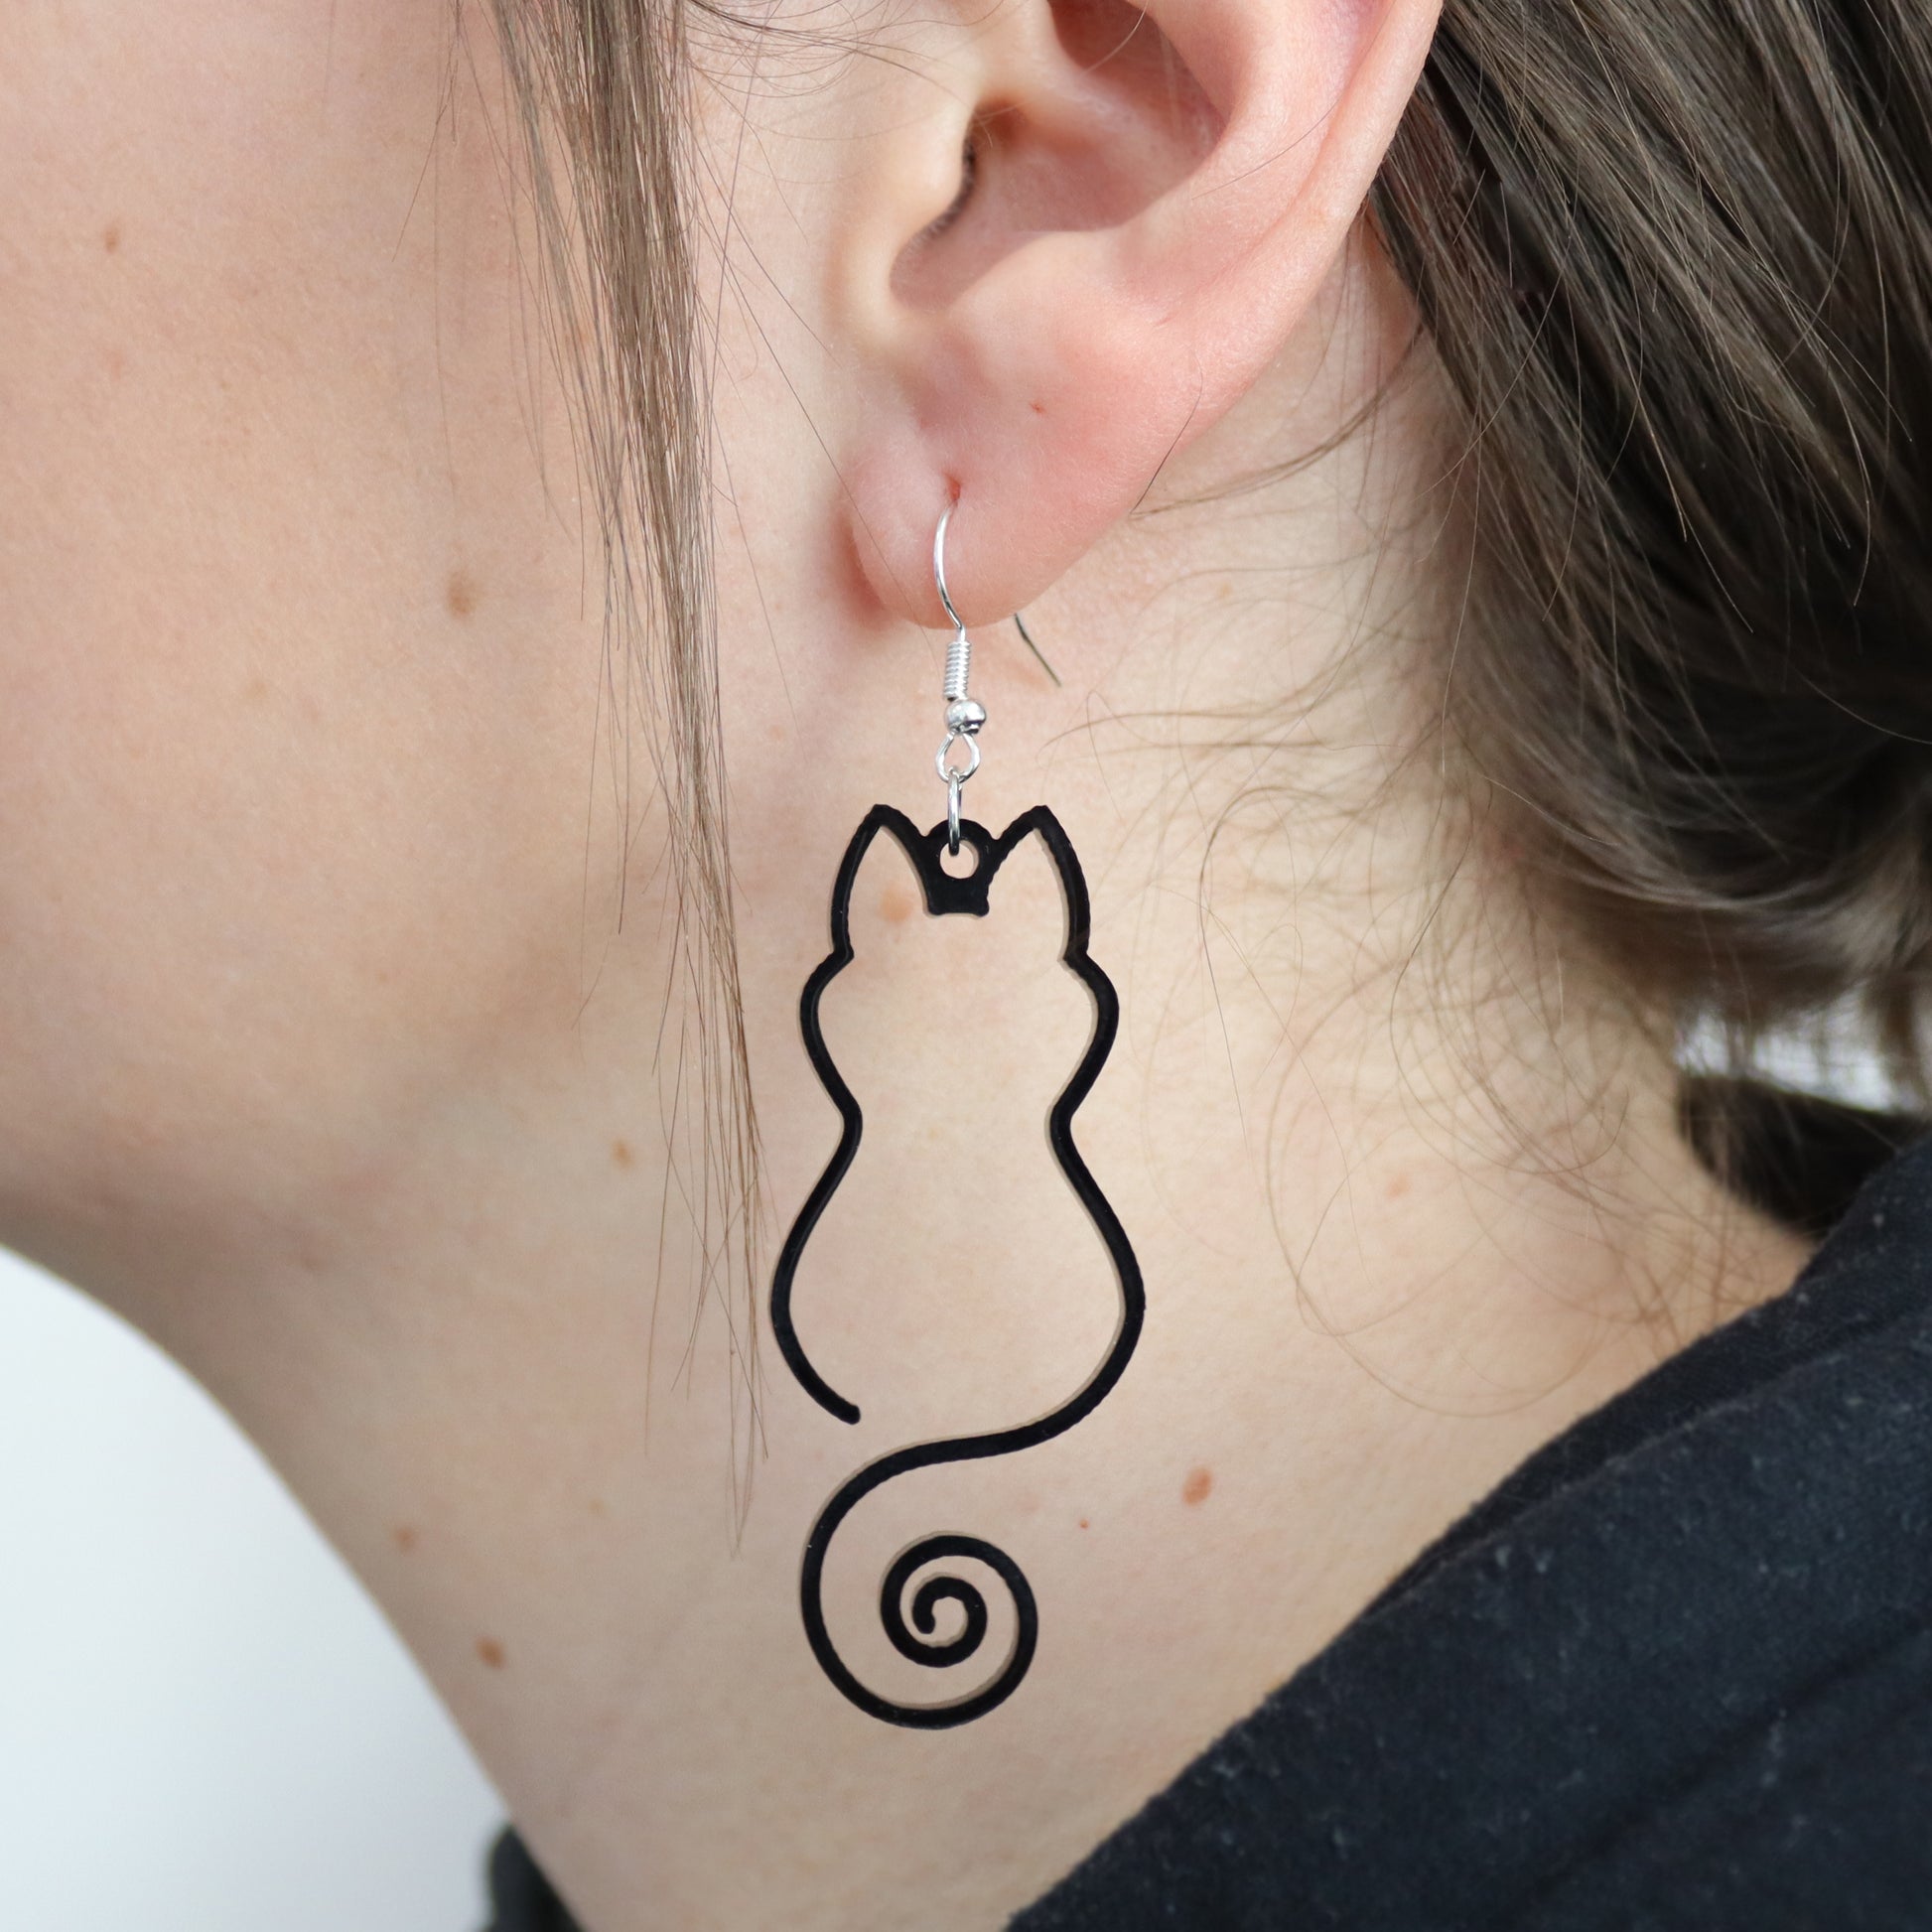 black cat silhouette large hanging black acrylic earring shown hanging in ear